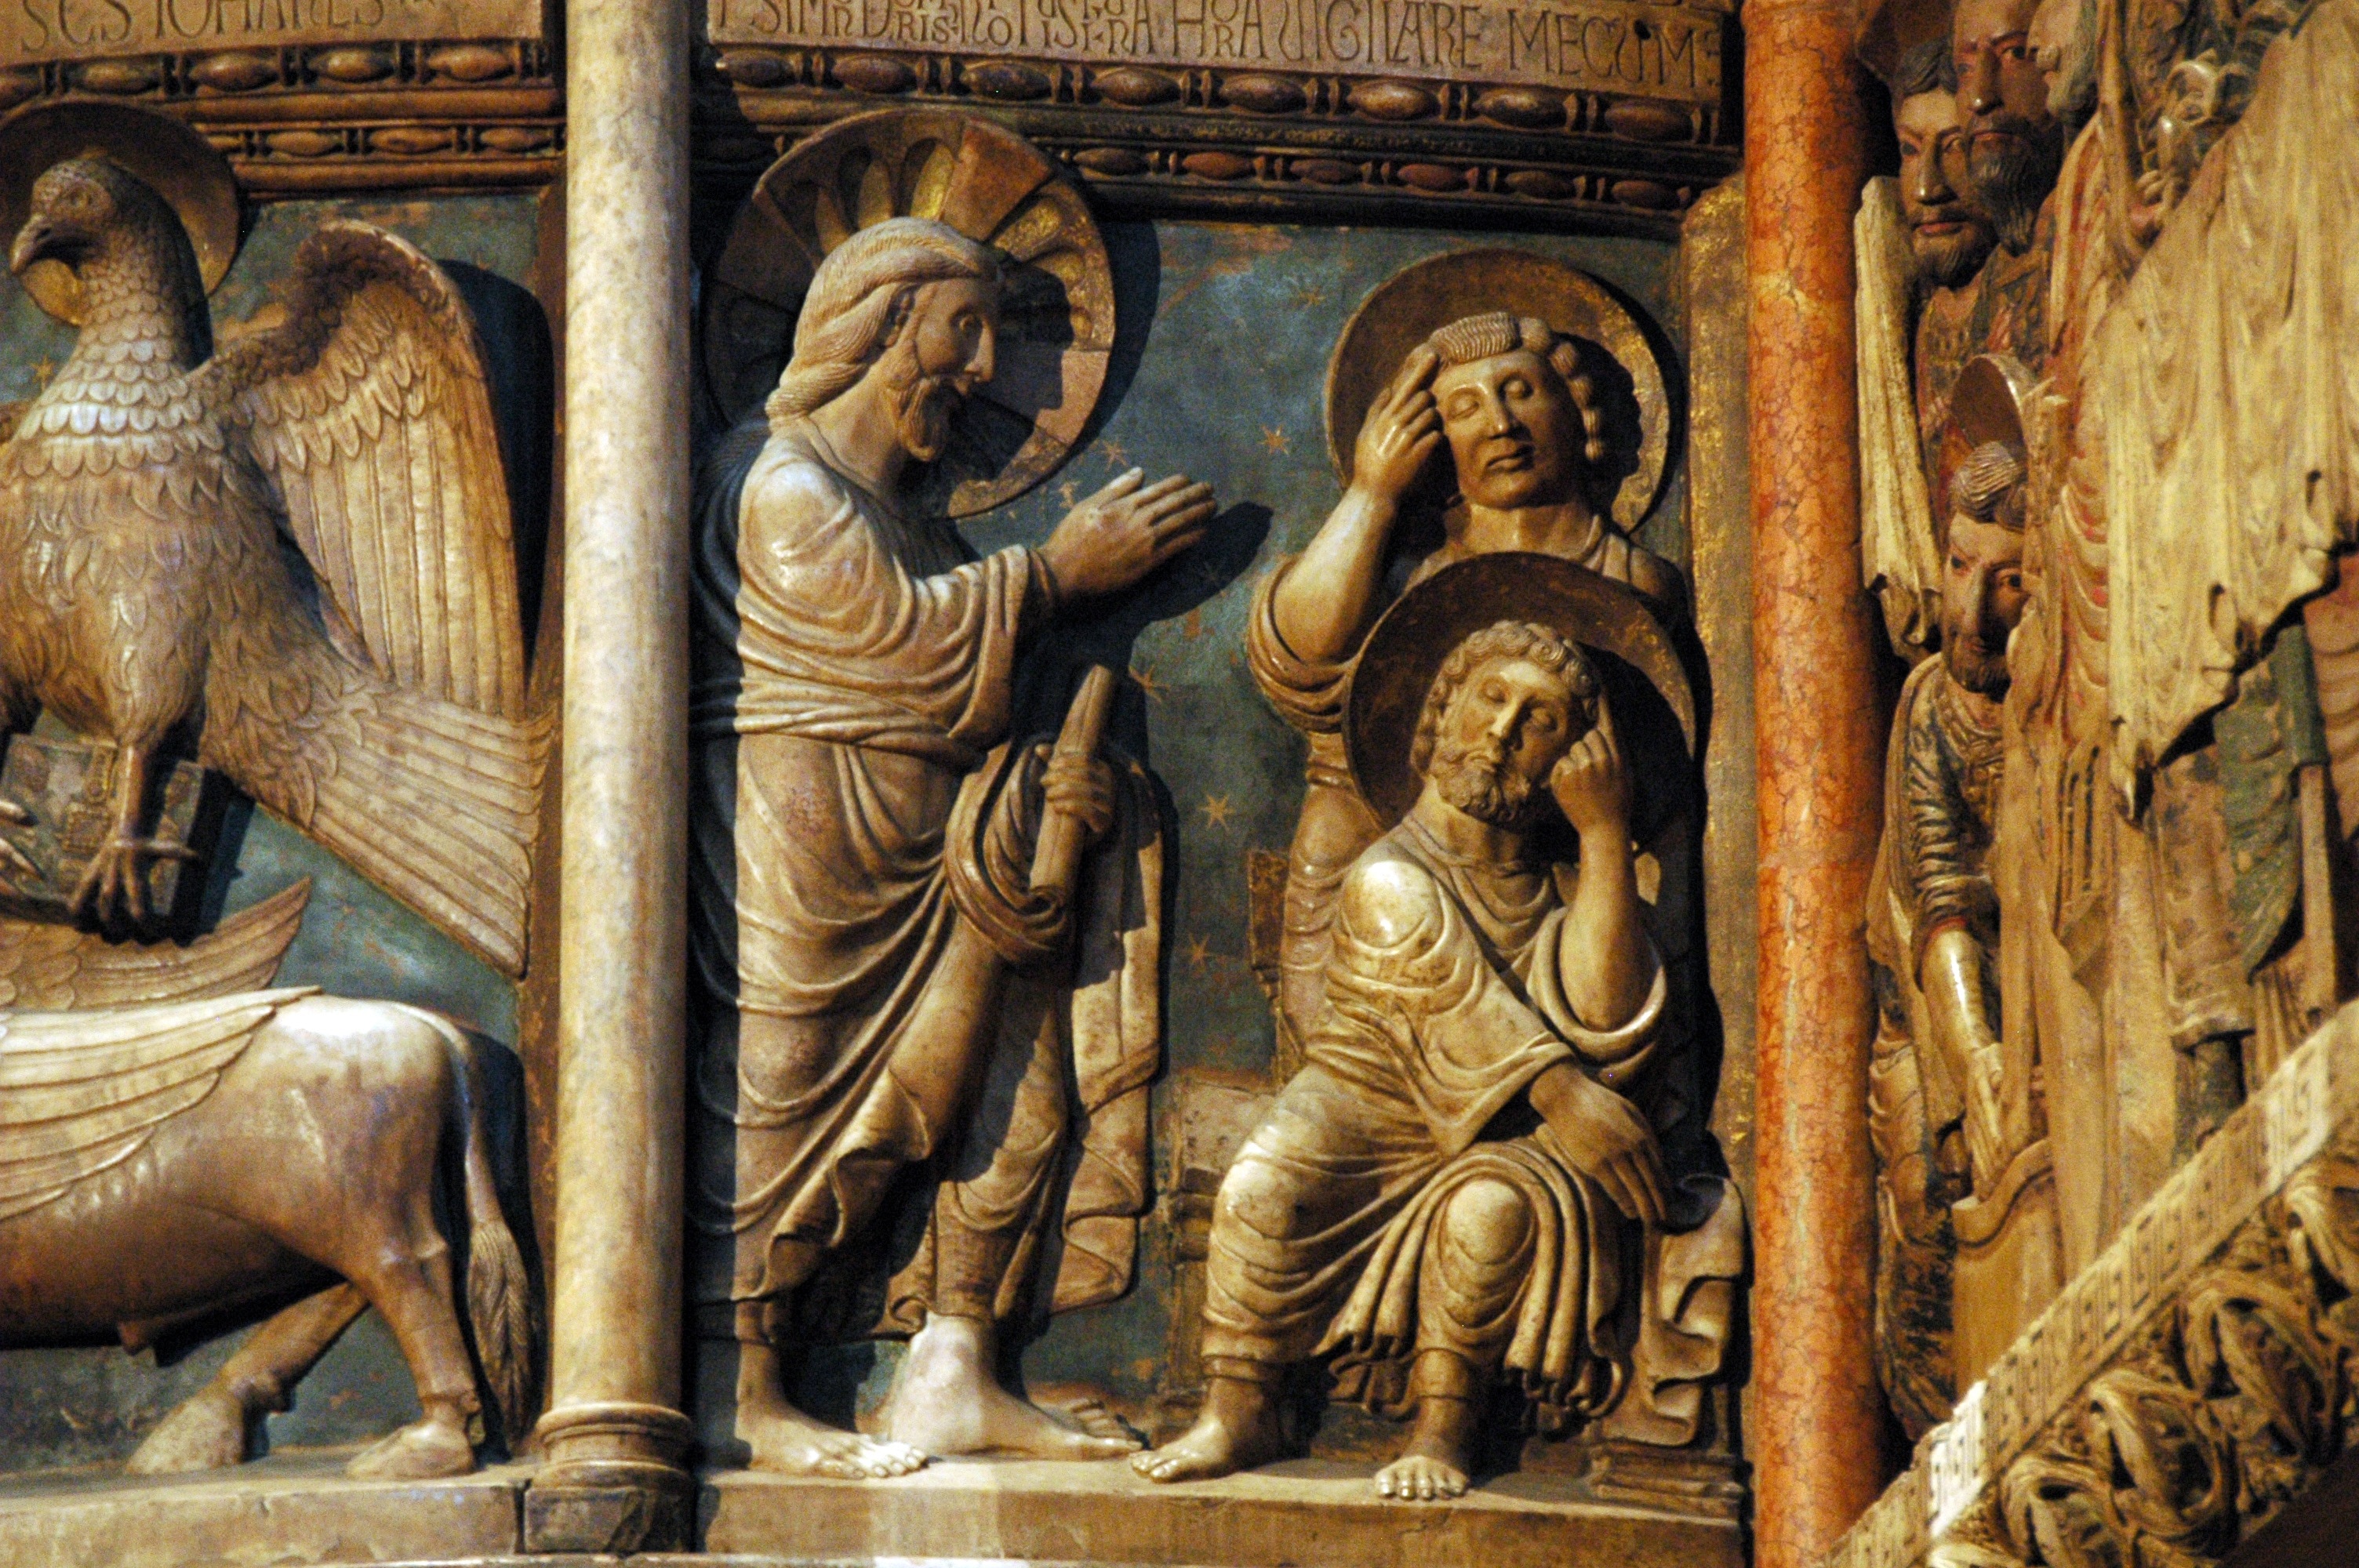 3 religious person's high relief sculpture